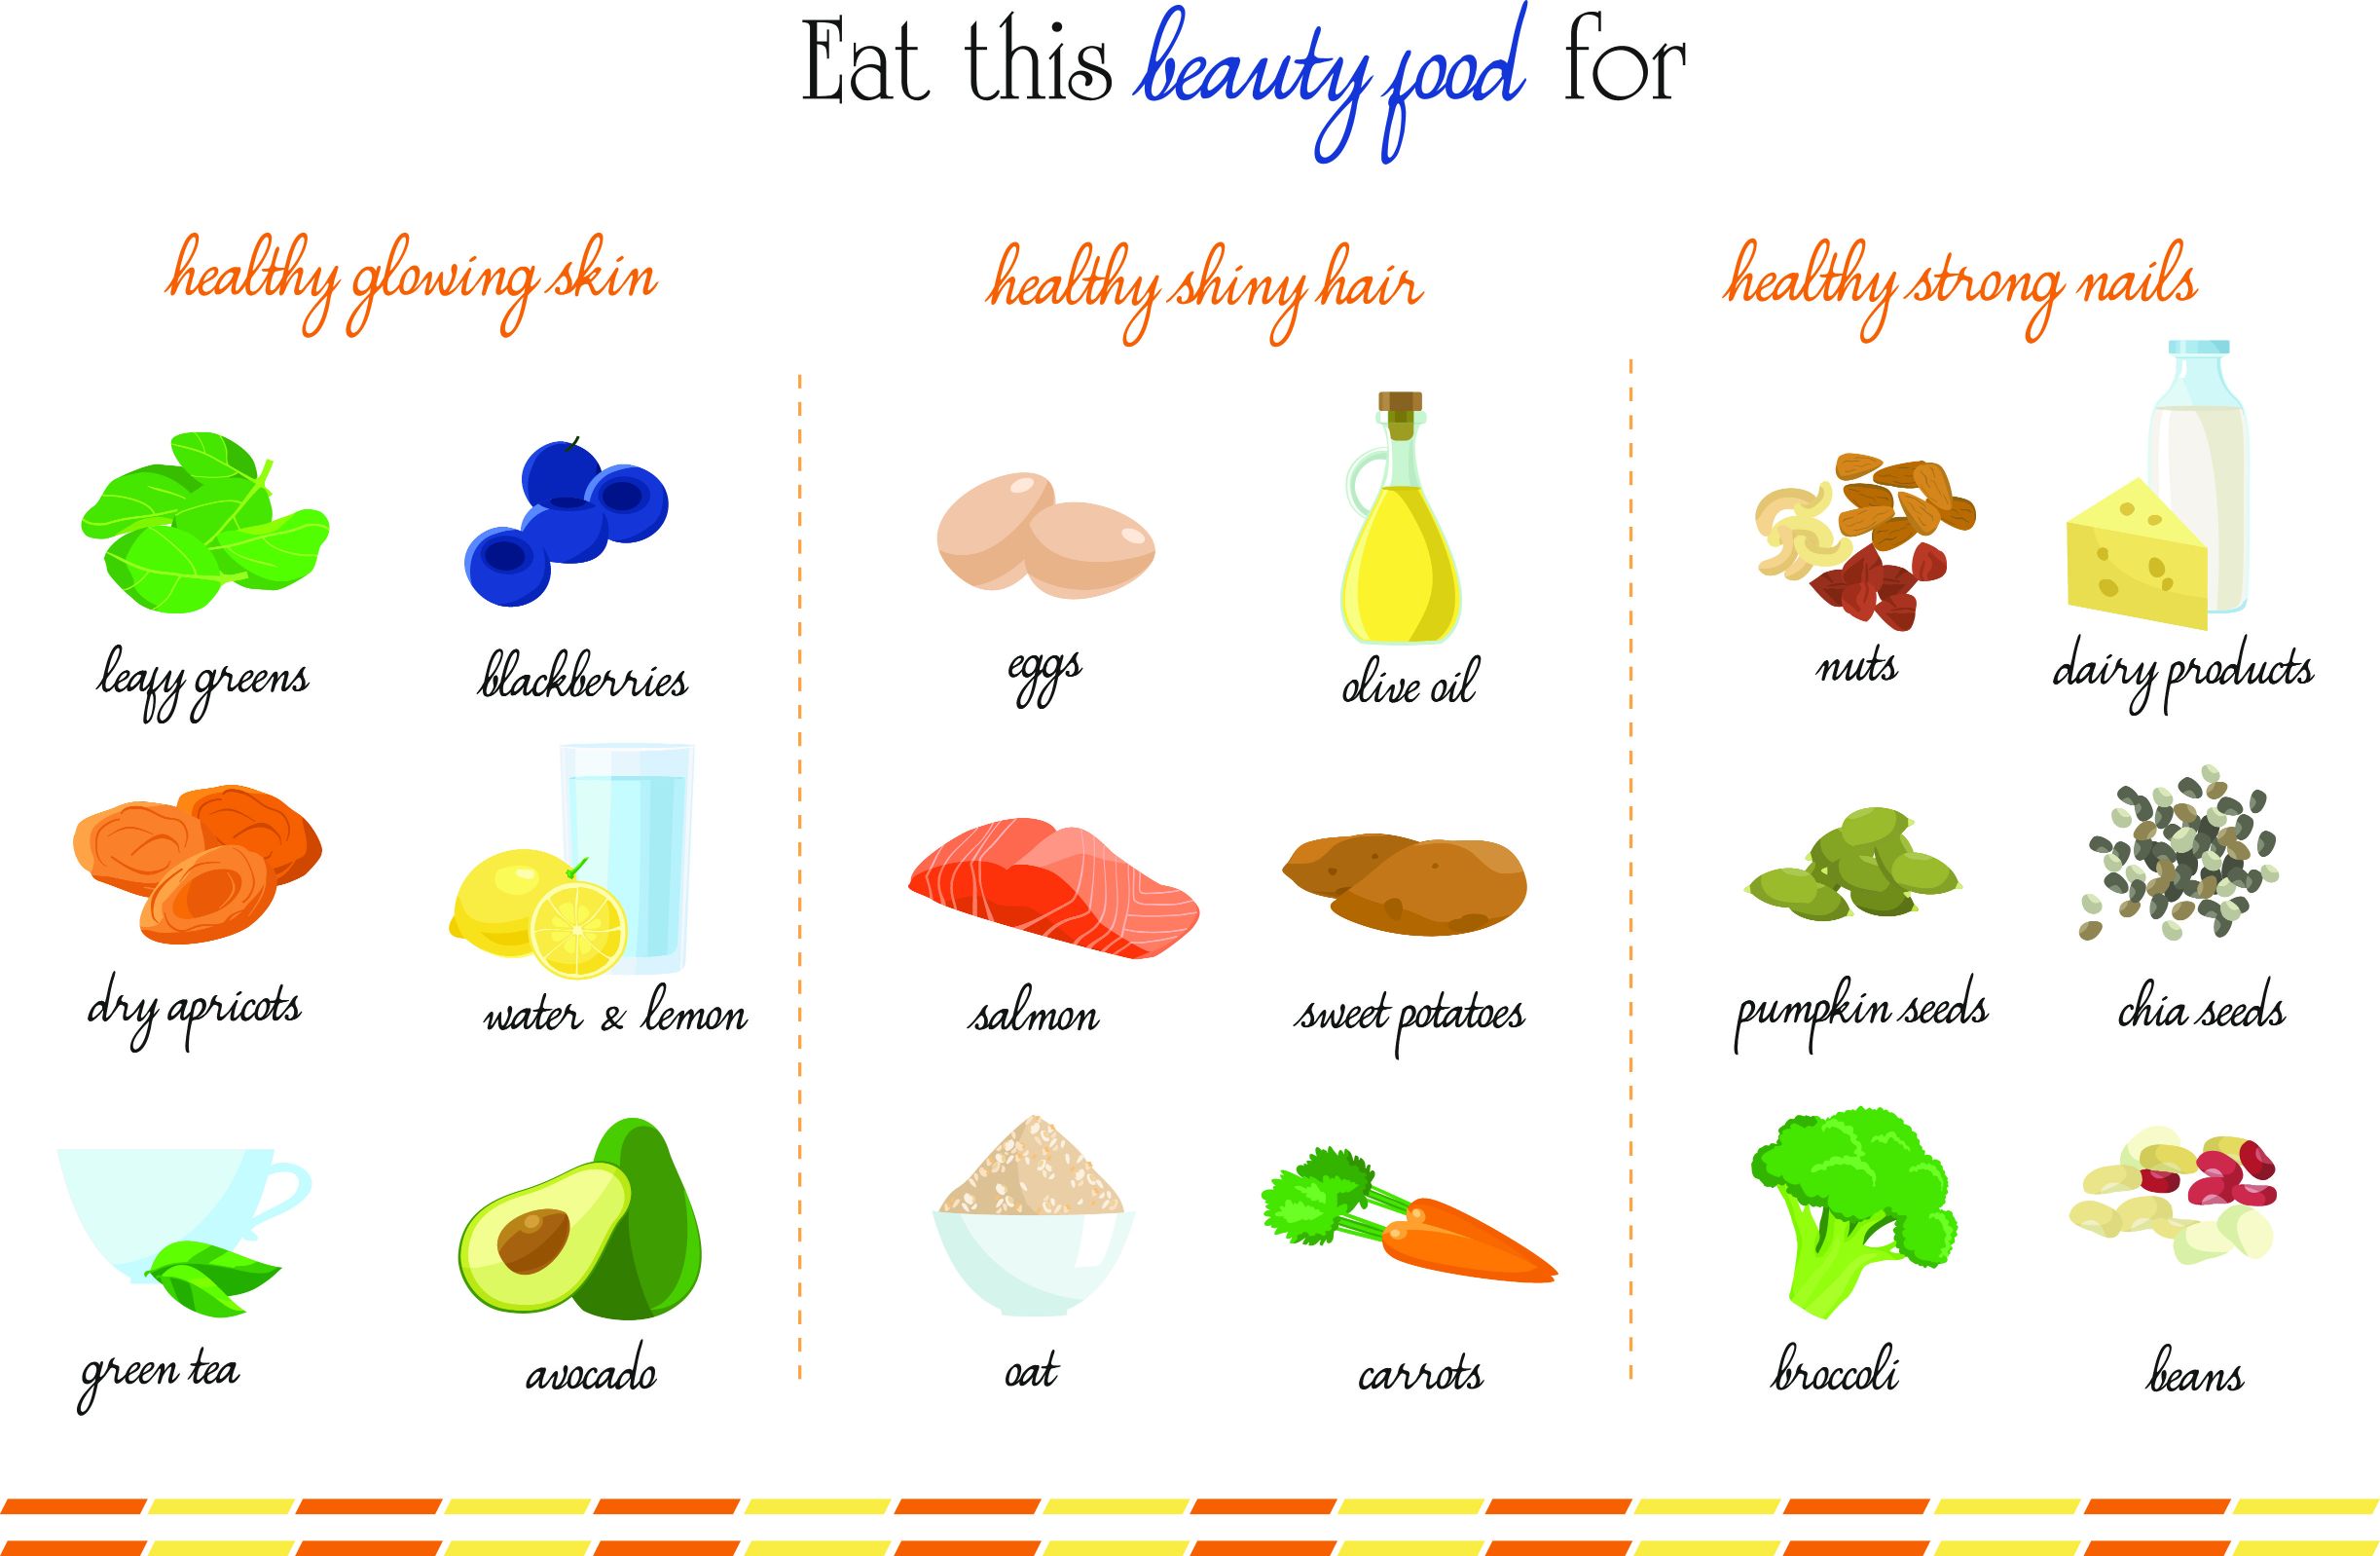 Healthy Hair Foods eat these foods for hair growth